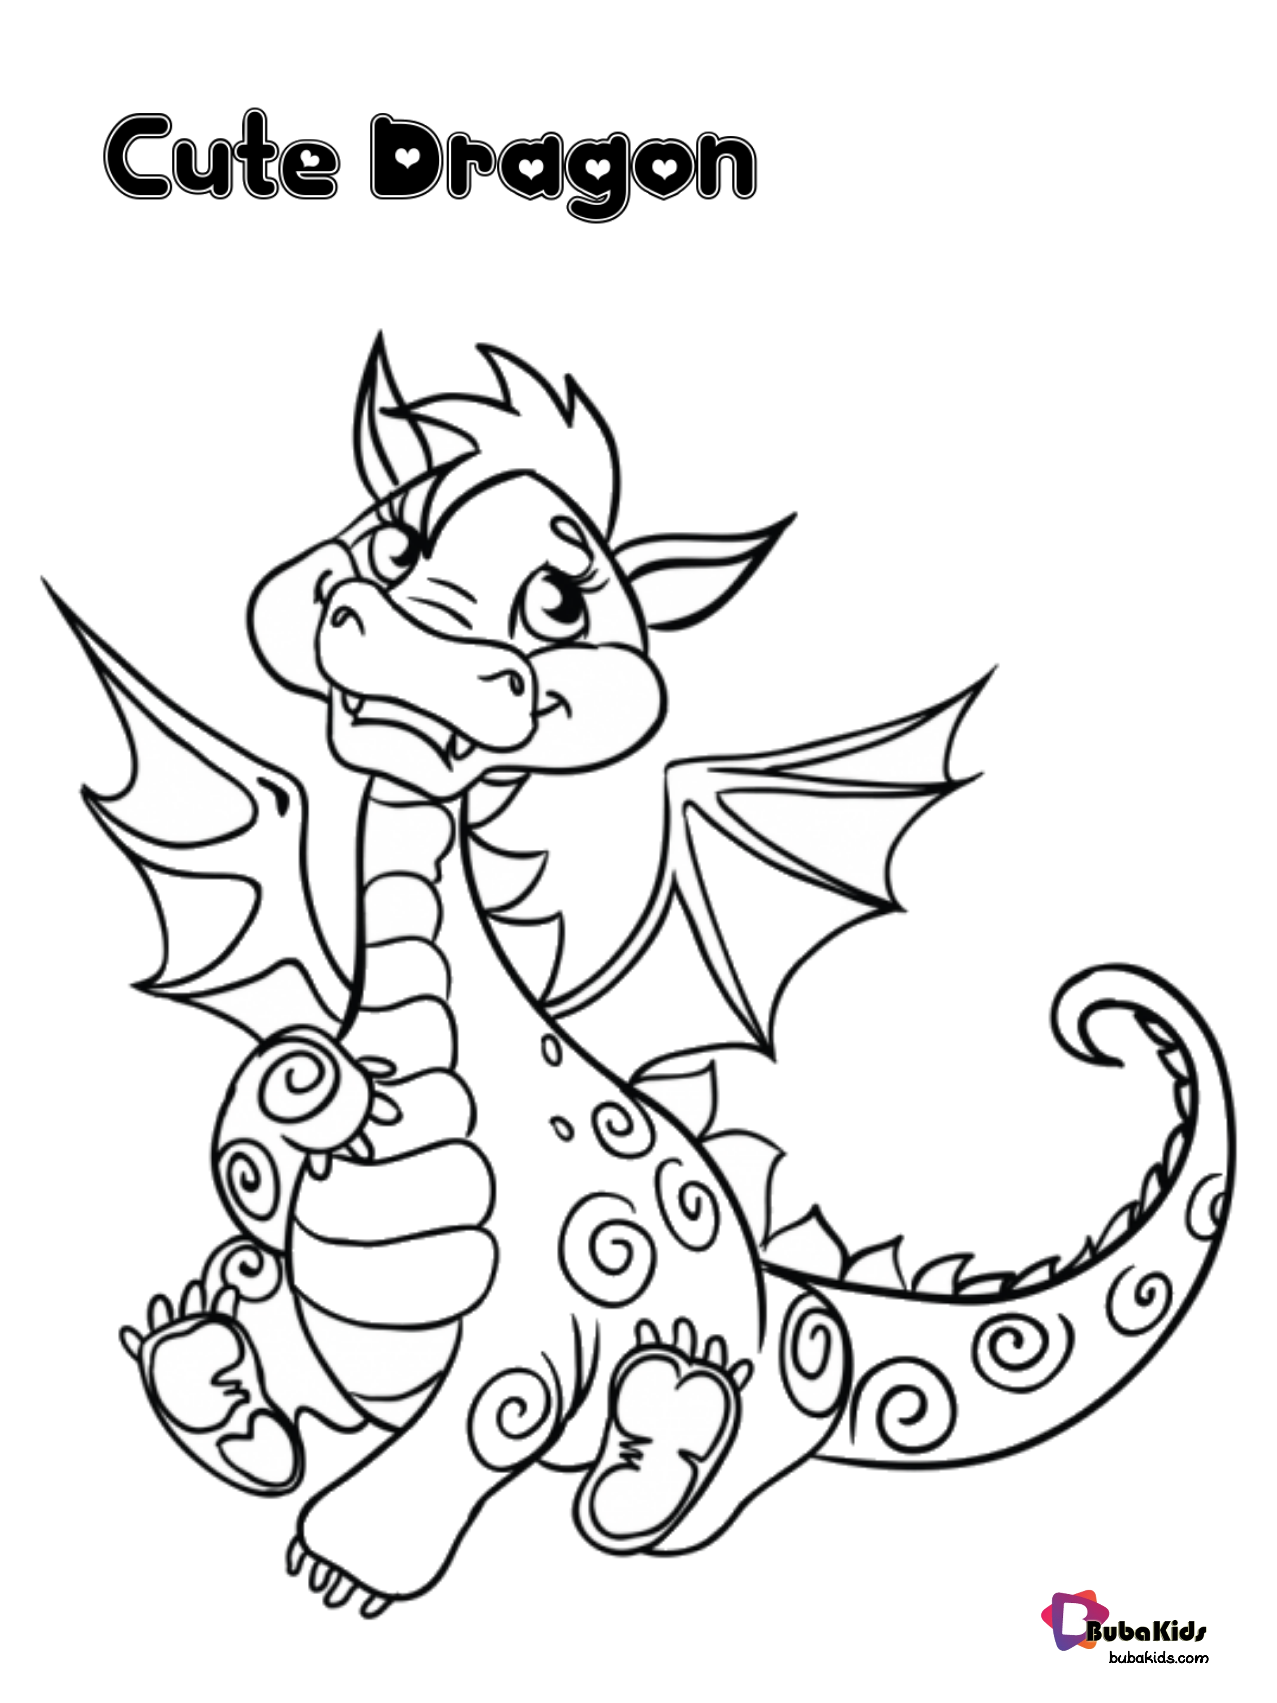 Cute dragon the mythical creatures coloring page Wallpaper